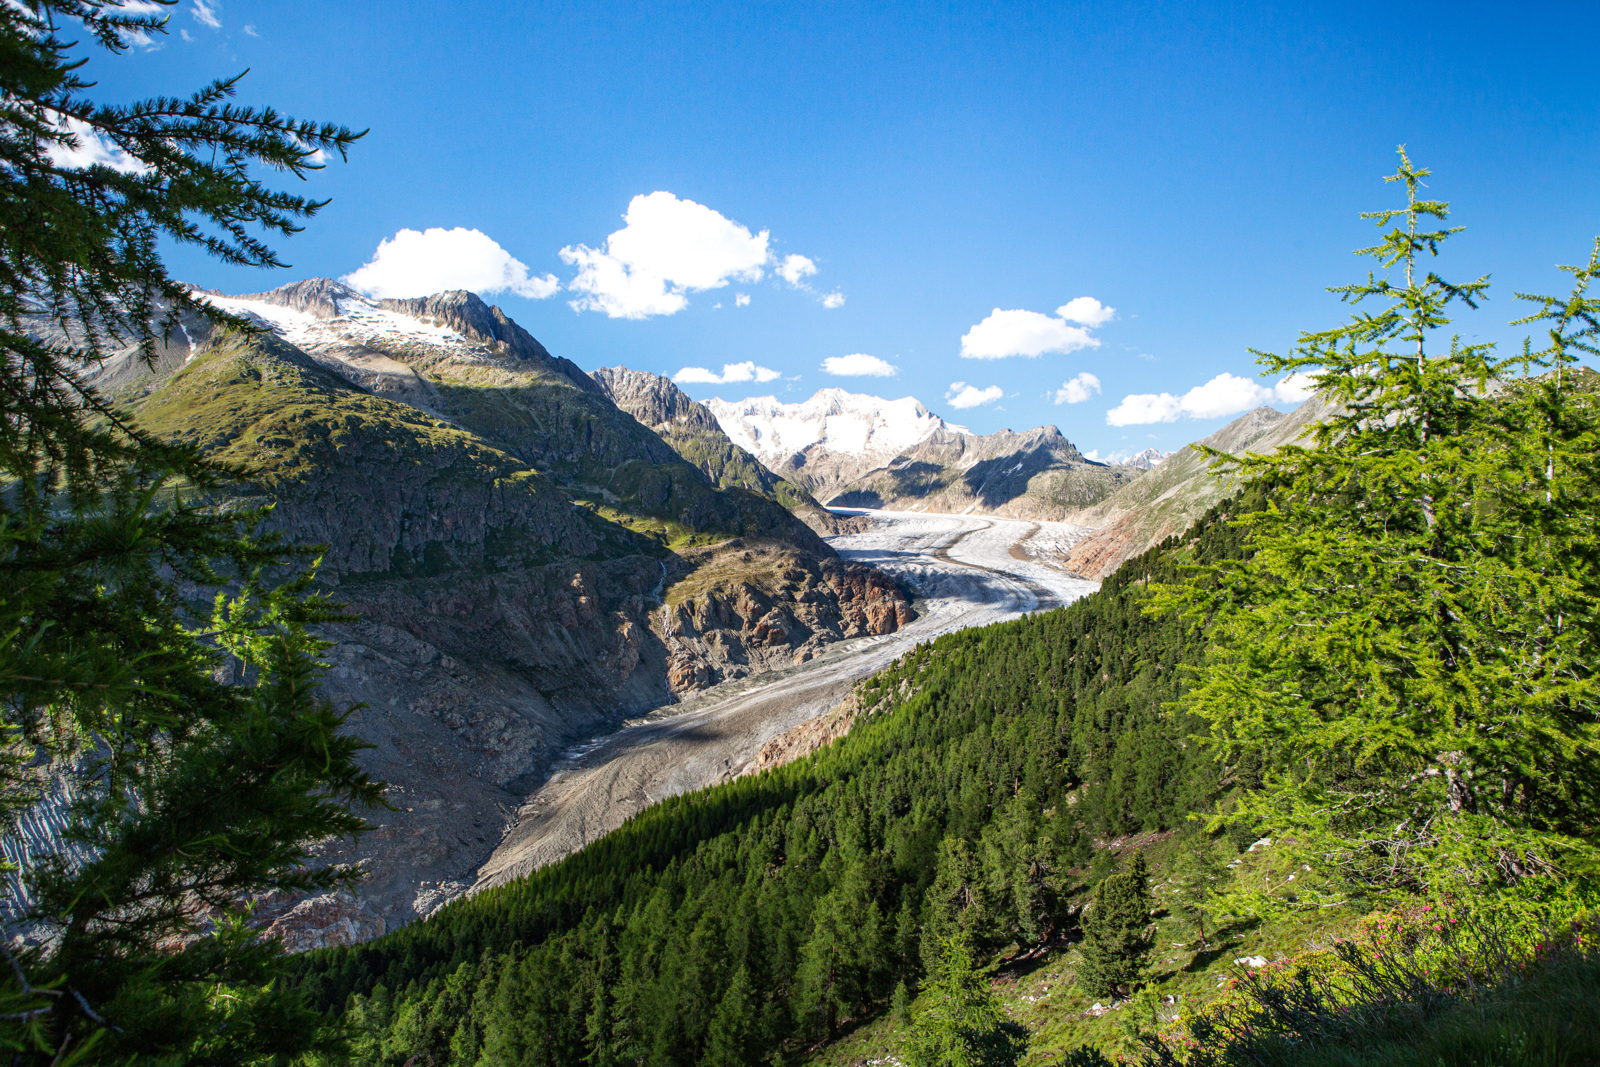 Aletsch forest – forest at the glacier's edge